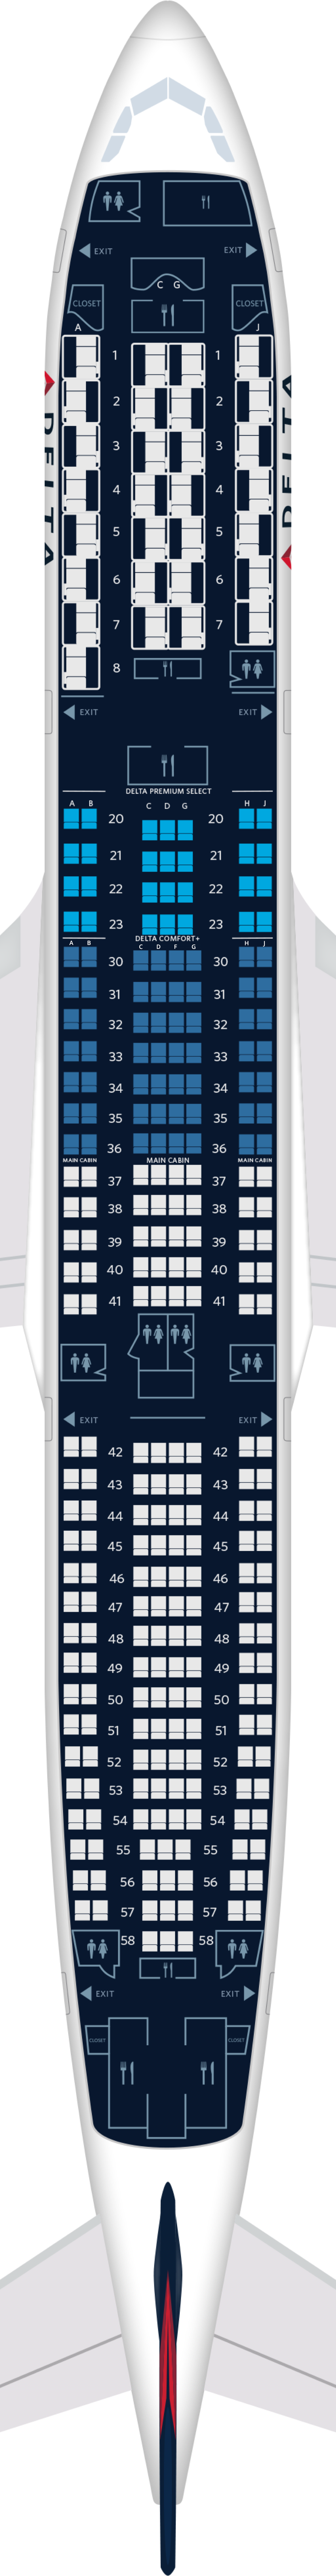 Get Airbus Seat Map Airbus Way My XXX Hot Girl